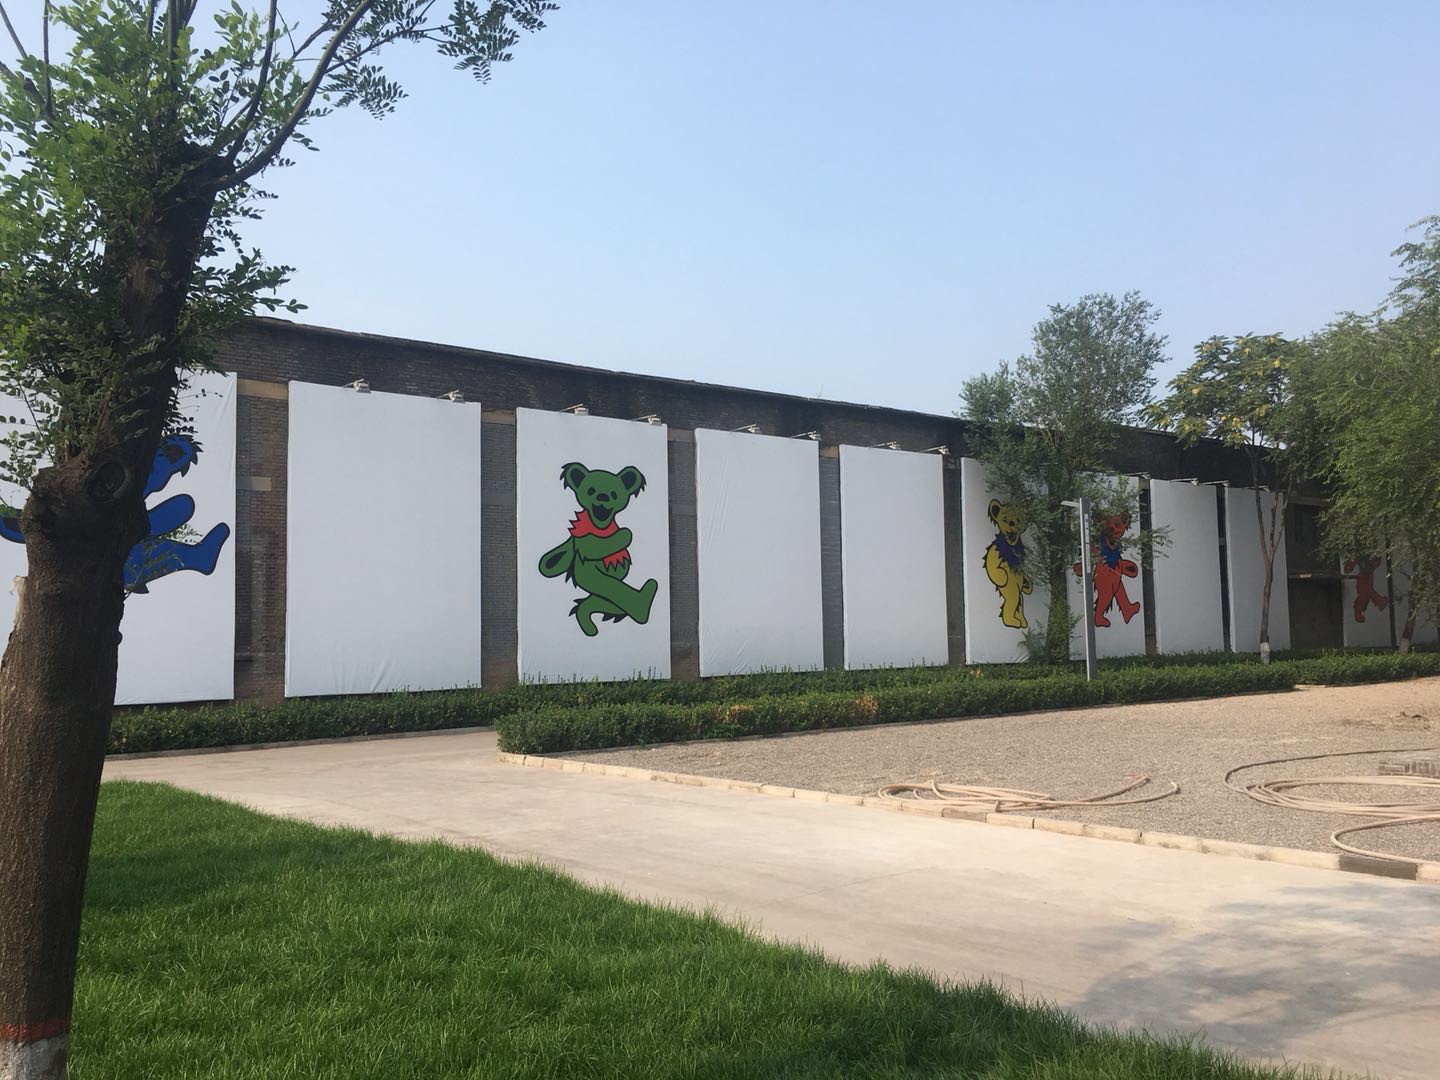 Installation view, Walls of Pingyao, curated by Lorenzo Benedetti, Pingyao, 2018